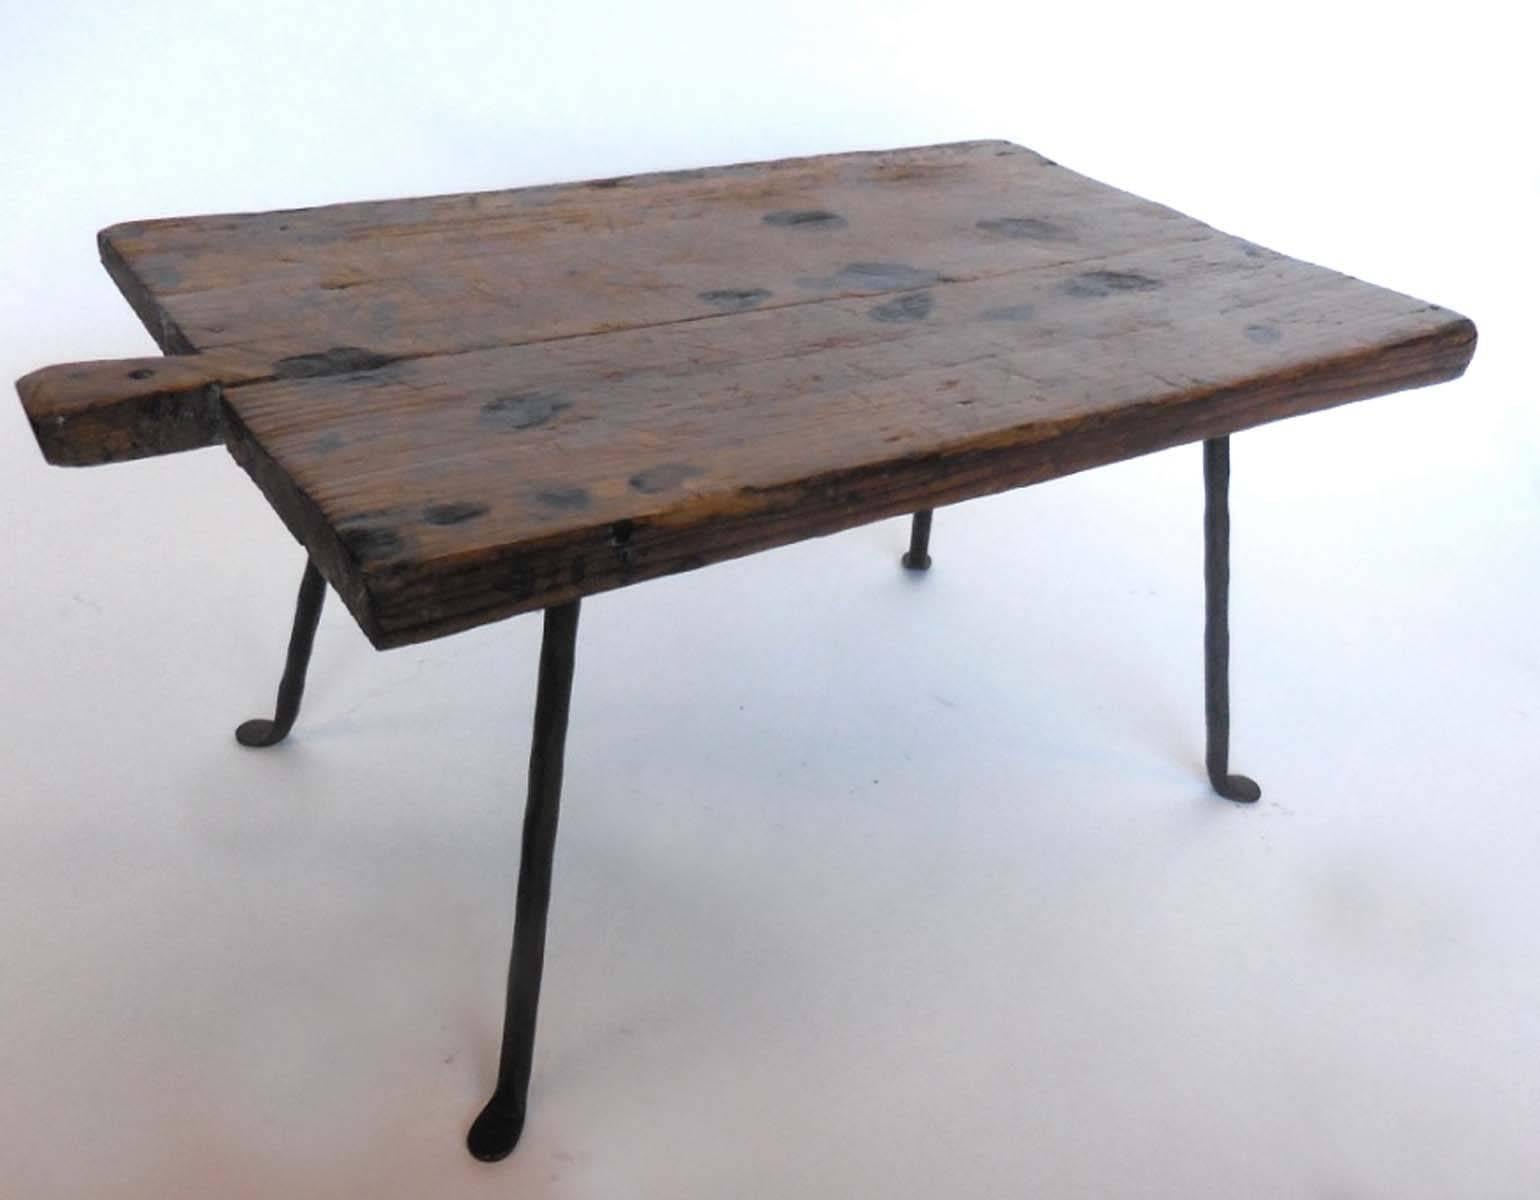 Set of antique wooden bateas (trays) with contemporary hand-forged legs. Great patina on the wood. Great side tables or coffee table cluster. Can be sold separately , dimensions and retail prices:
Upper left: 26 x 16.5 x 14 H SOLD
Lower left: 35.25